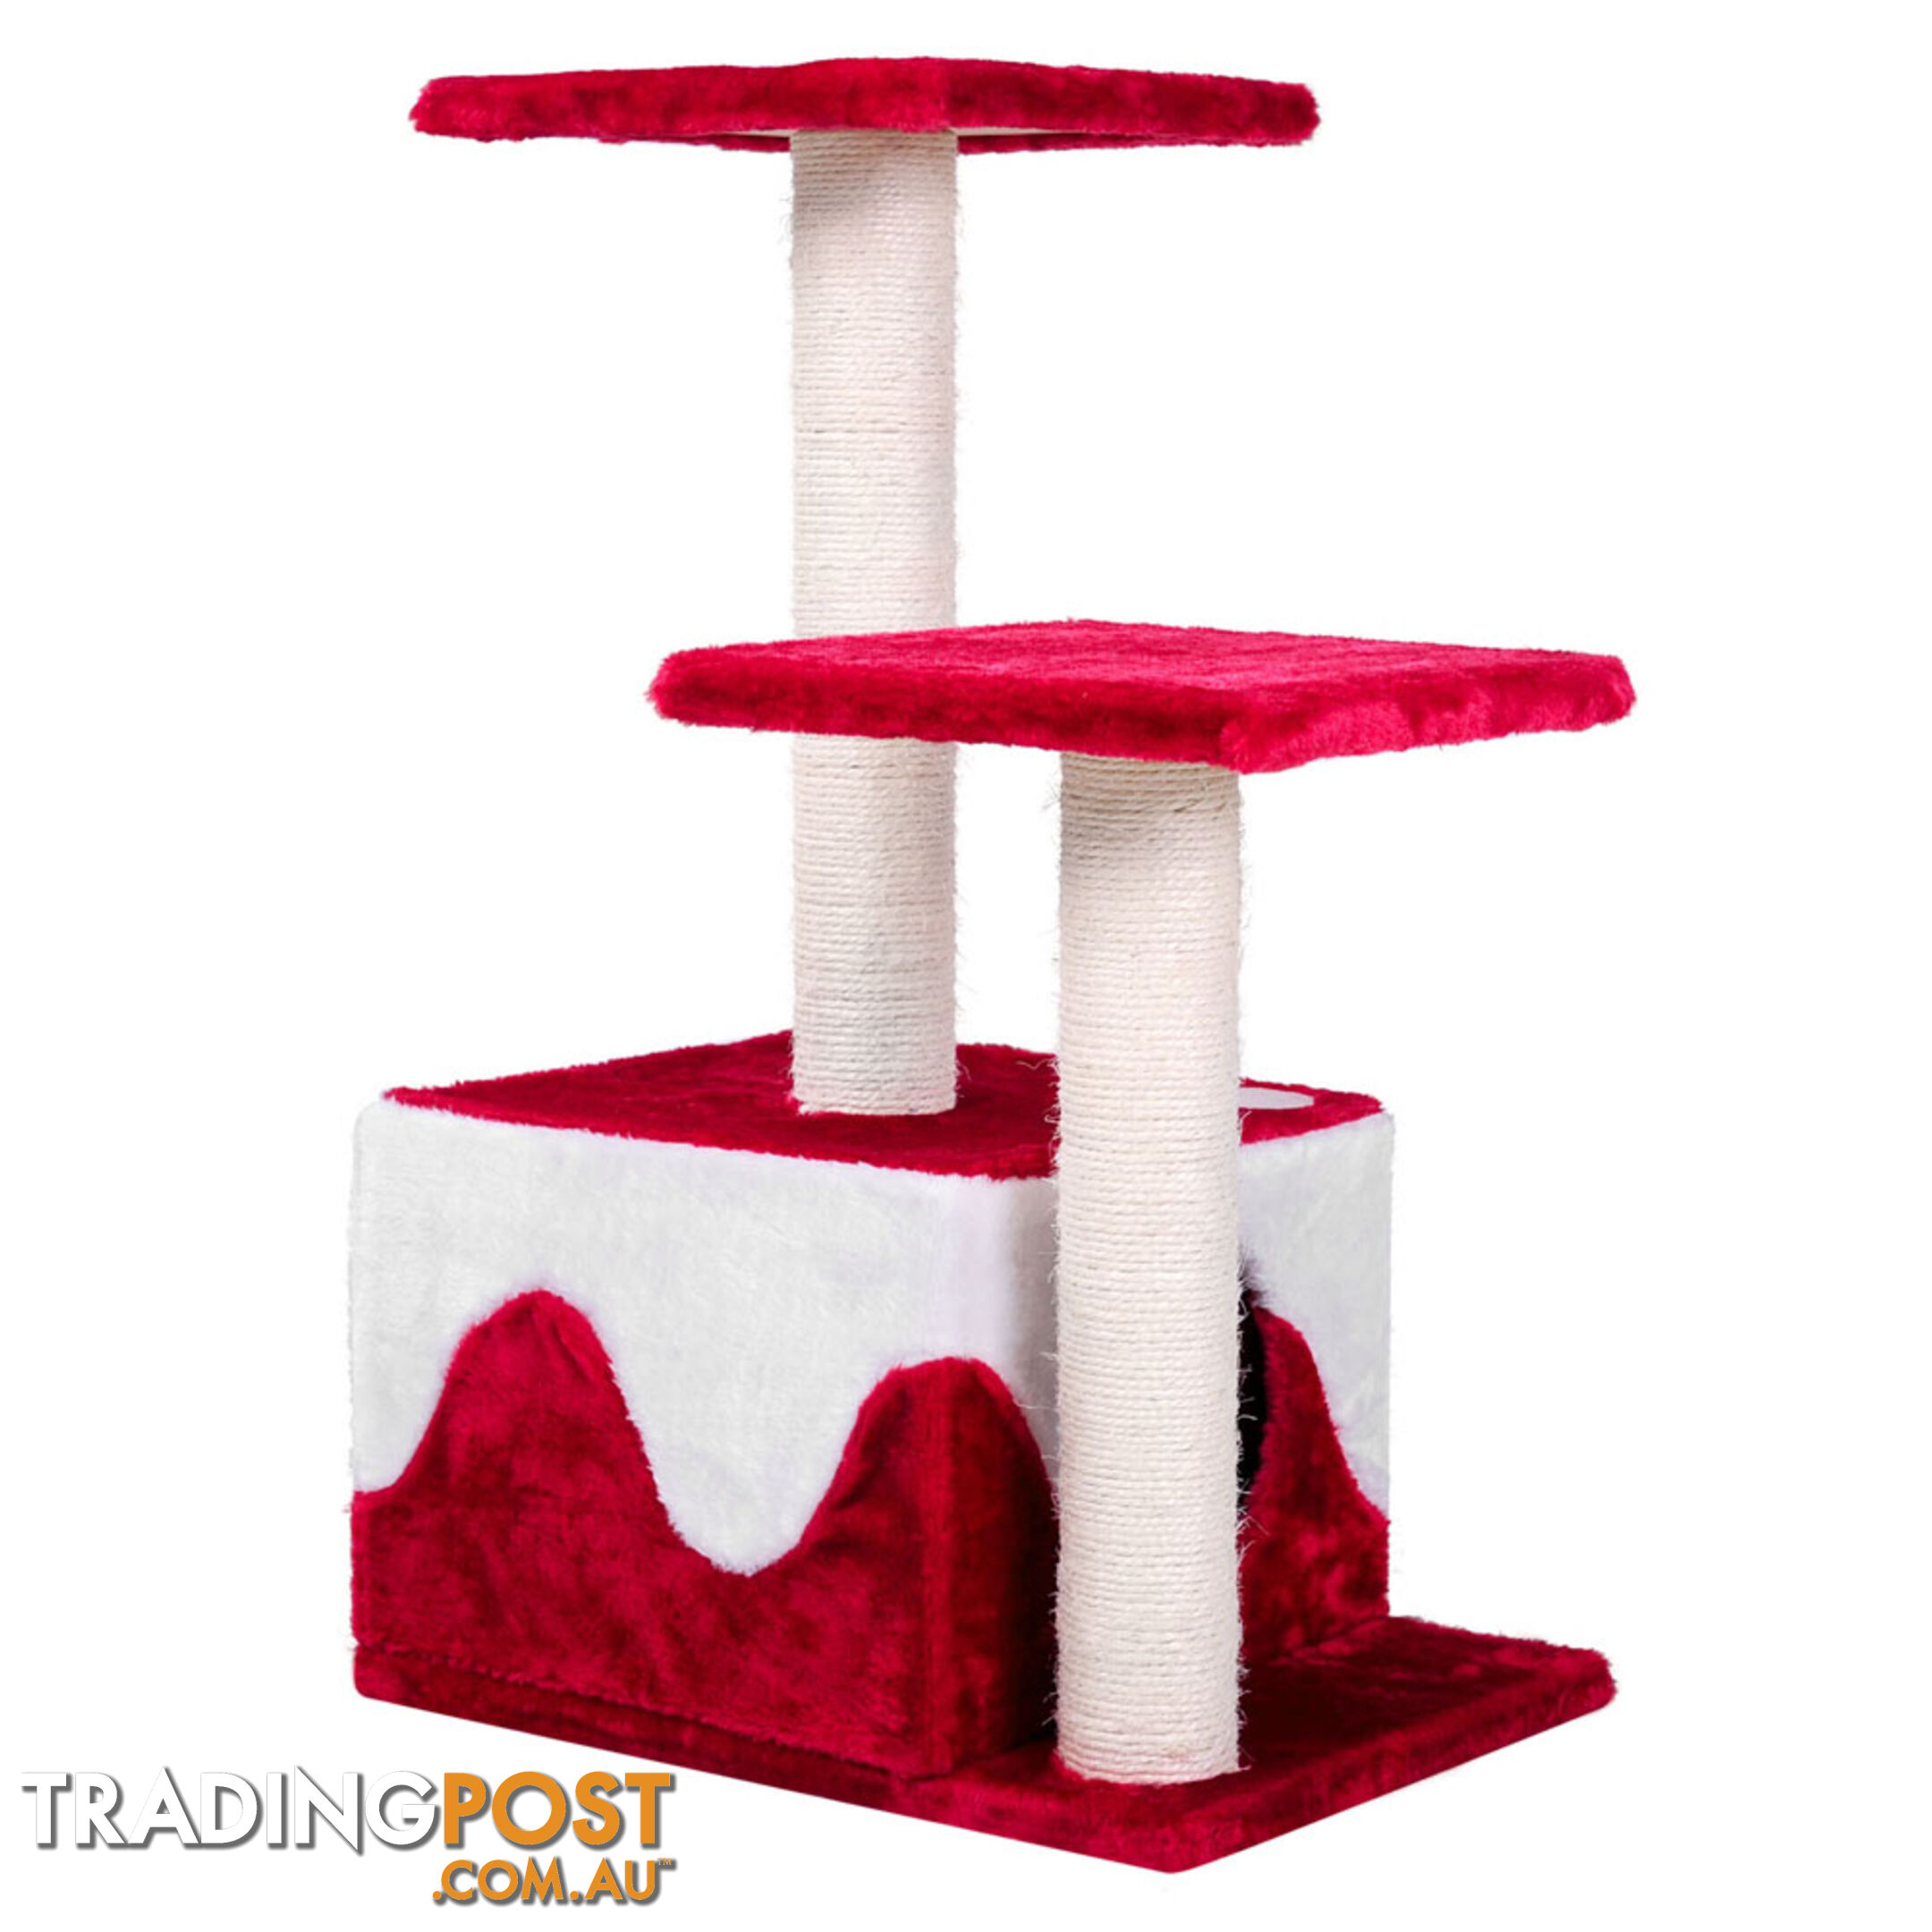 70cm Cat Scratching Poles Pet Post Furniture Tree Kitten Gym House Condo Red